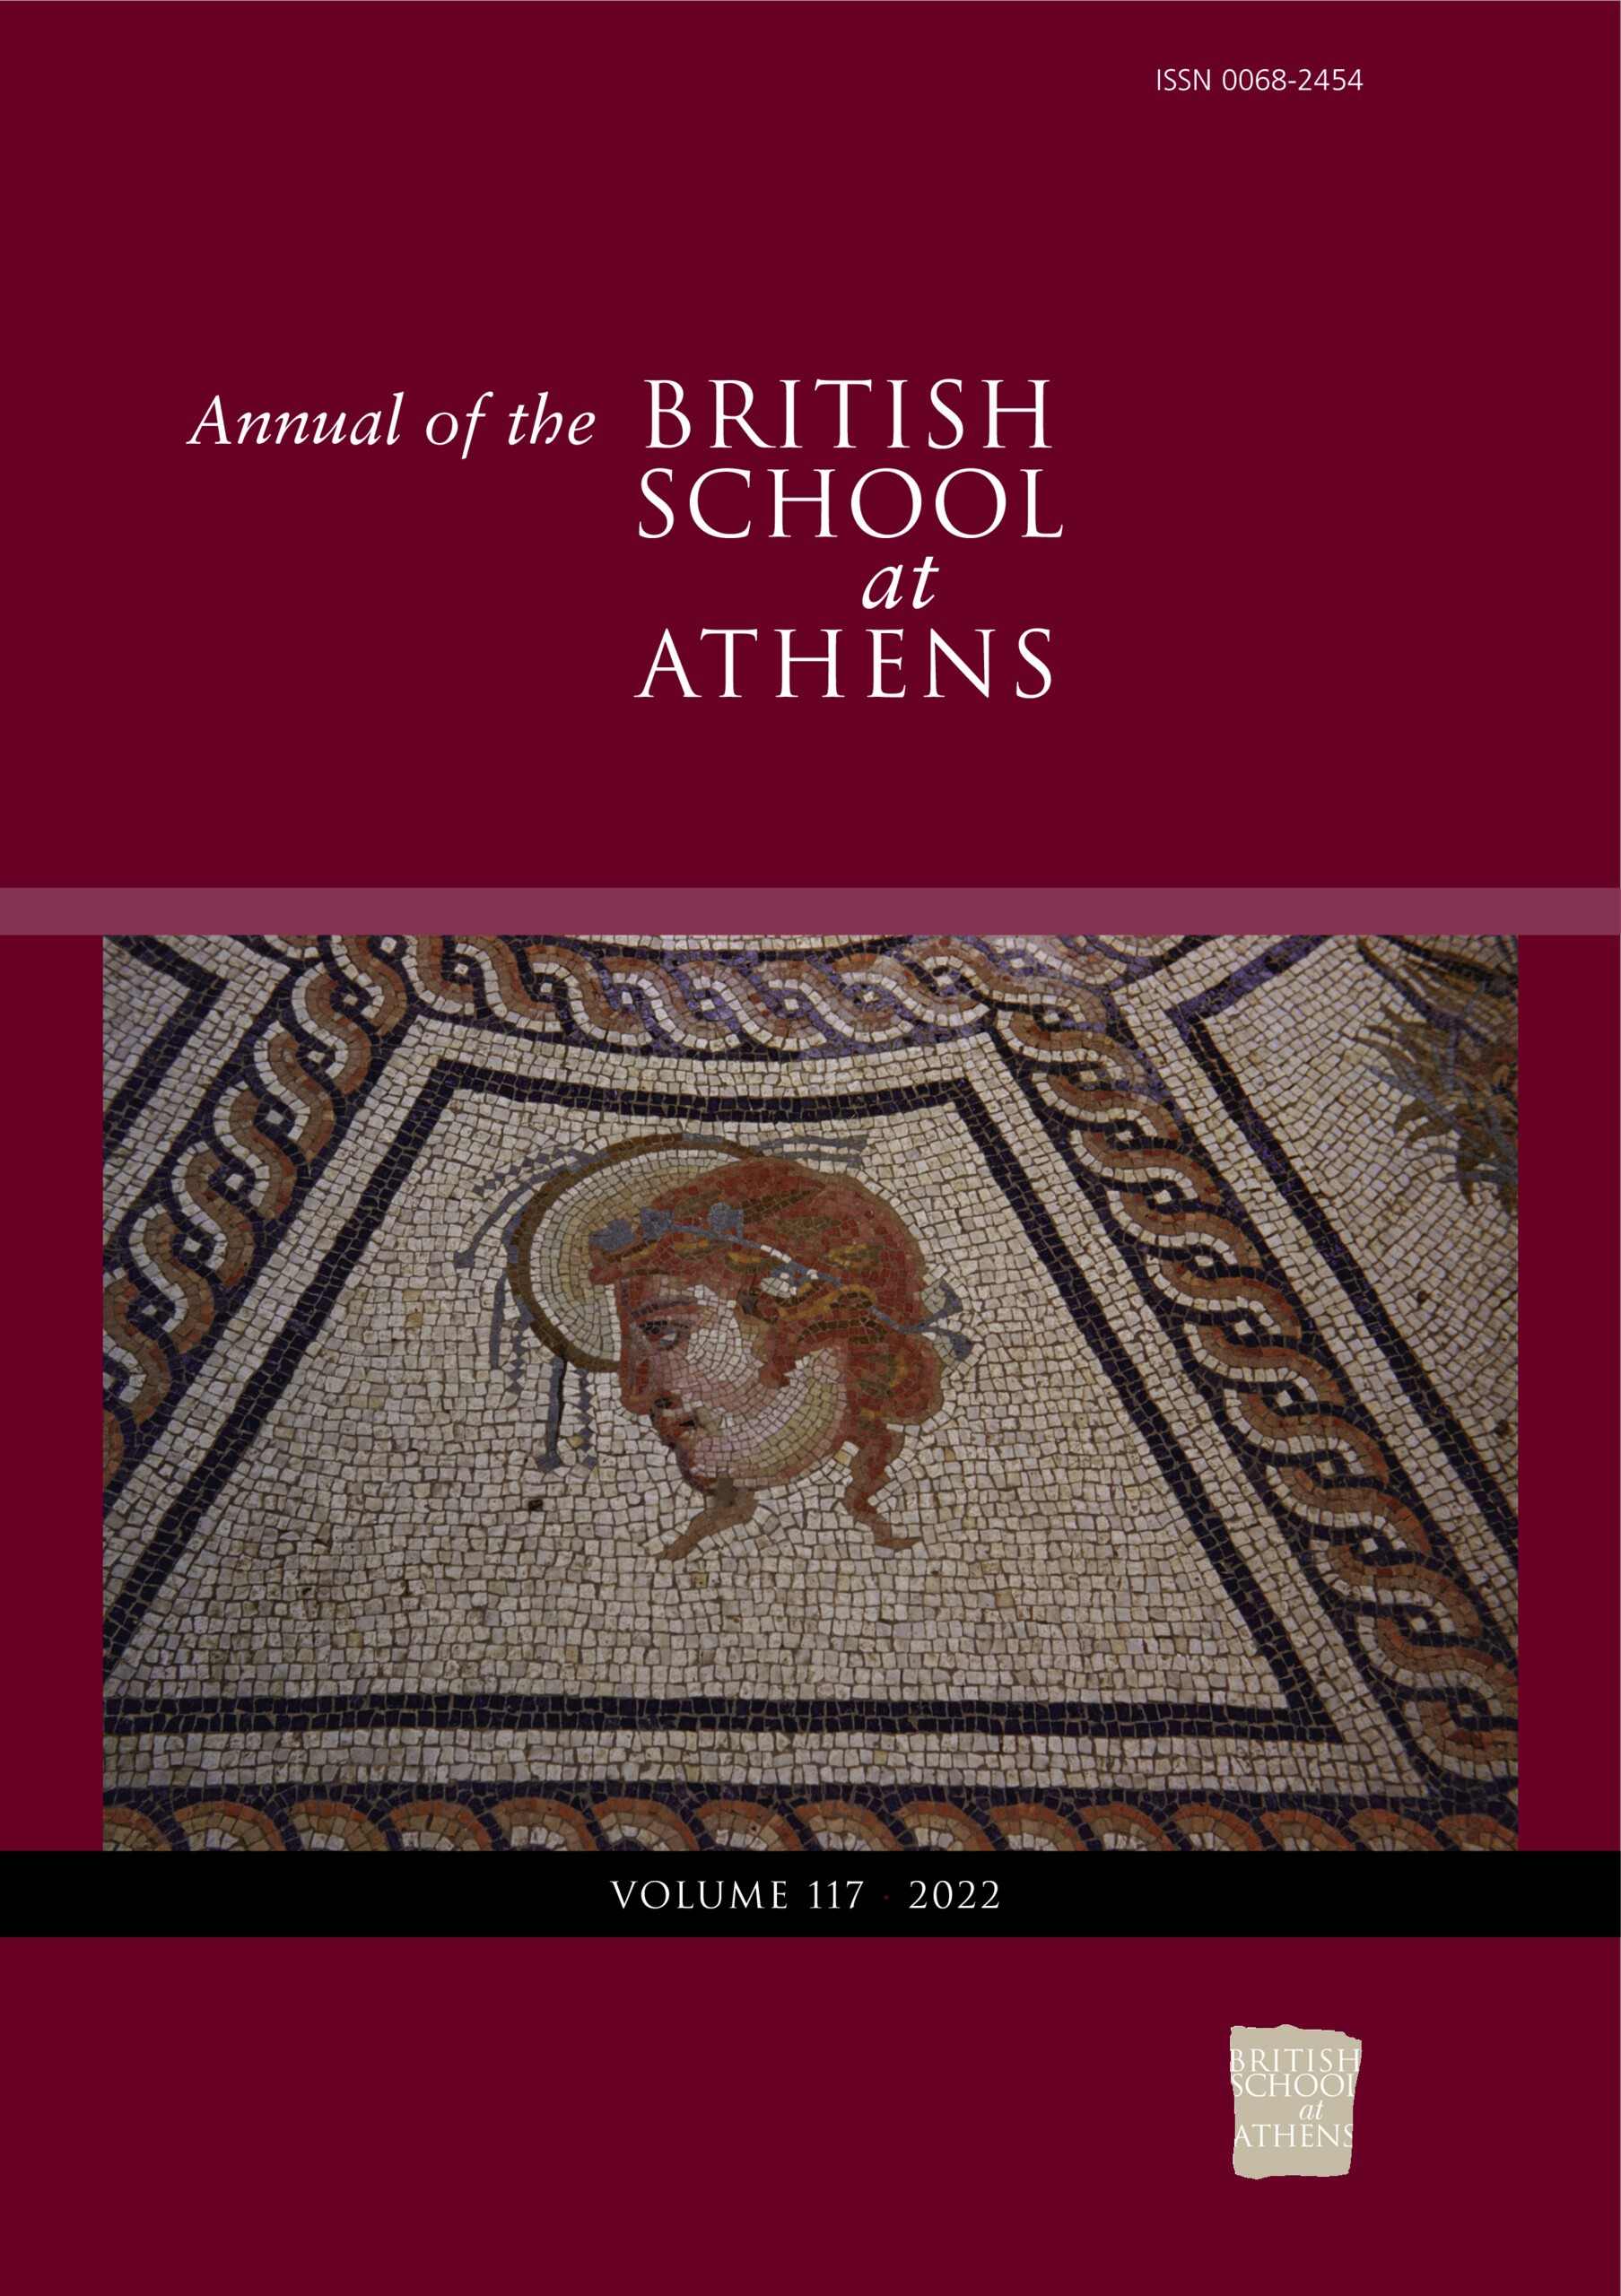 Annual of the British School at Athens issue 117